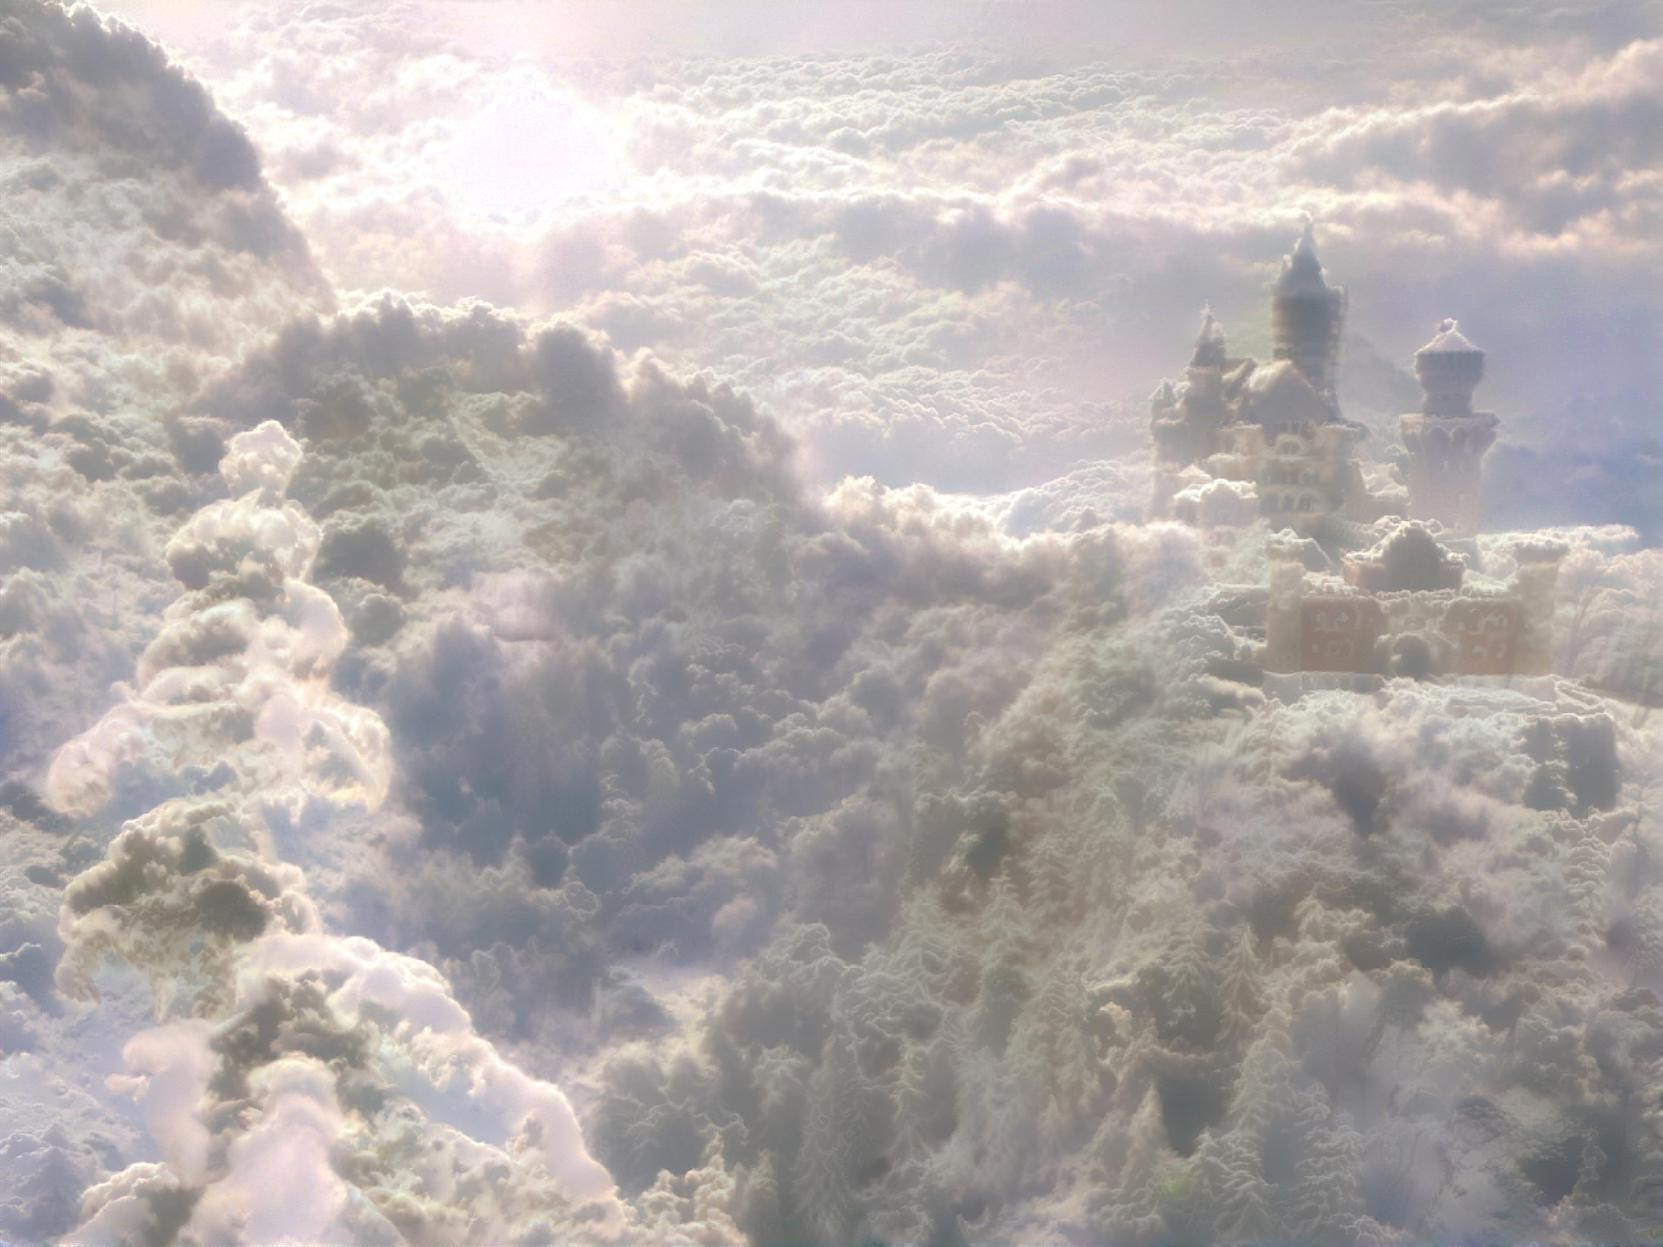 Lind's Castle in the Clouds